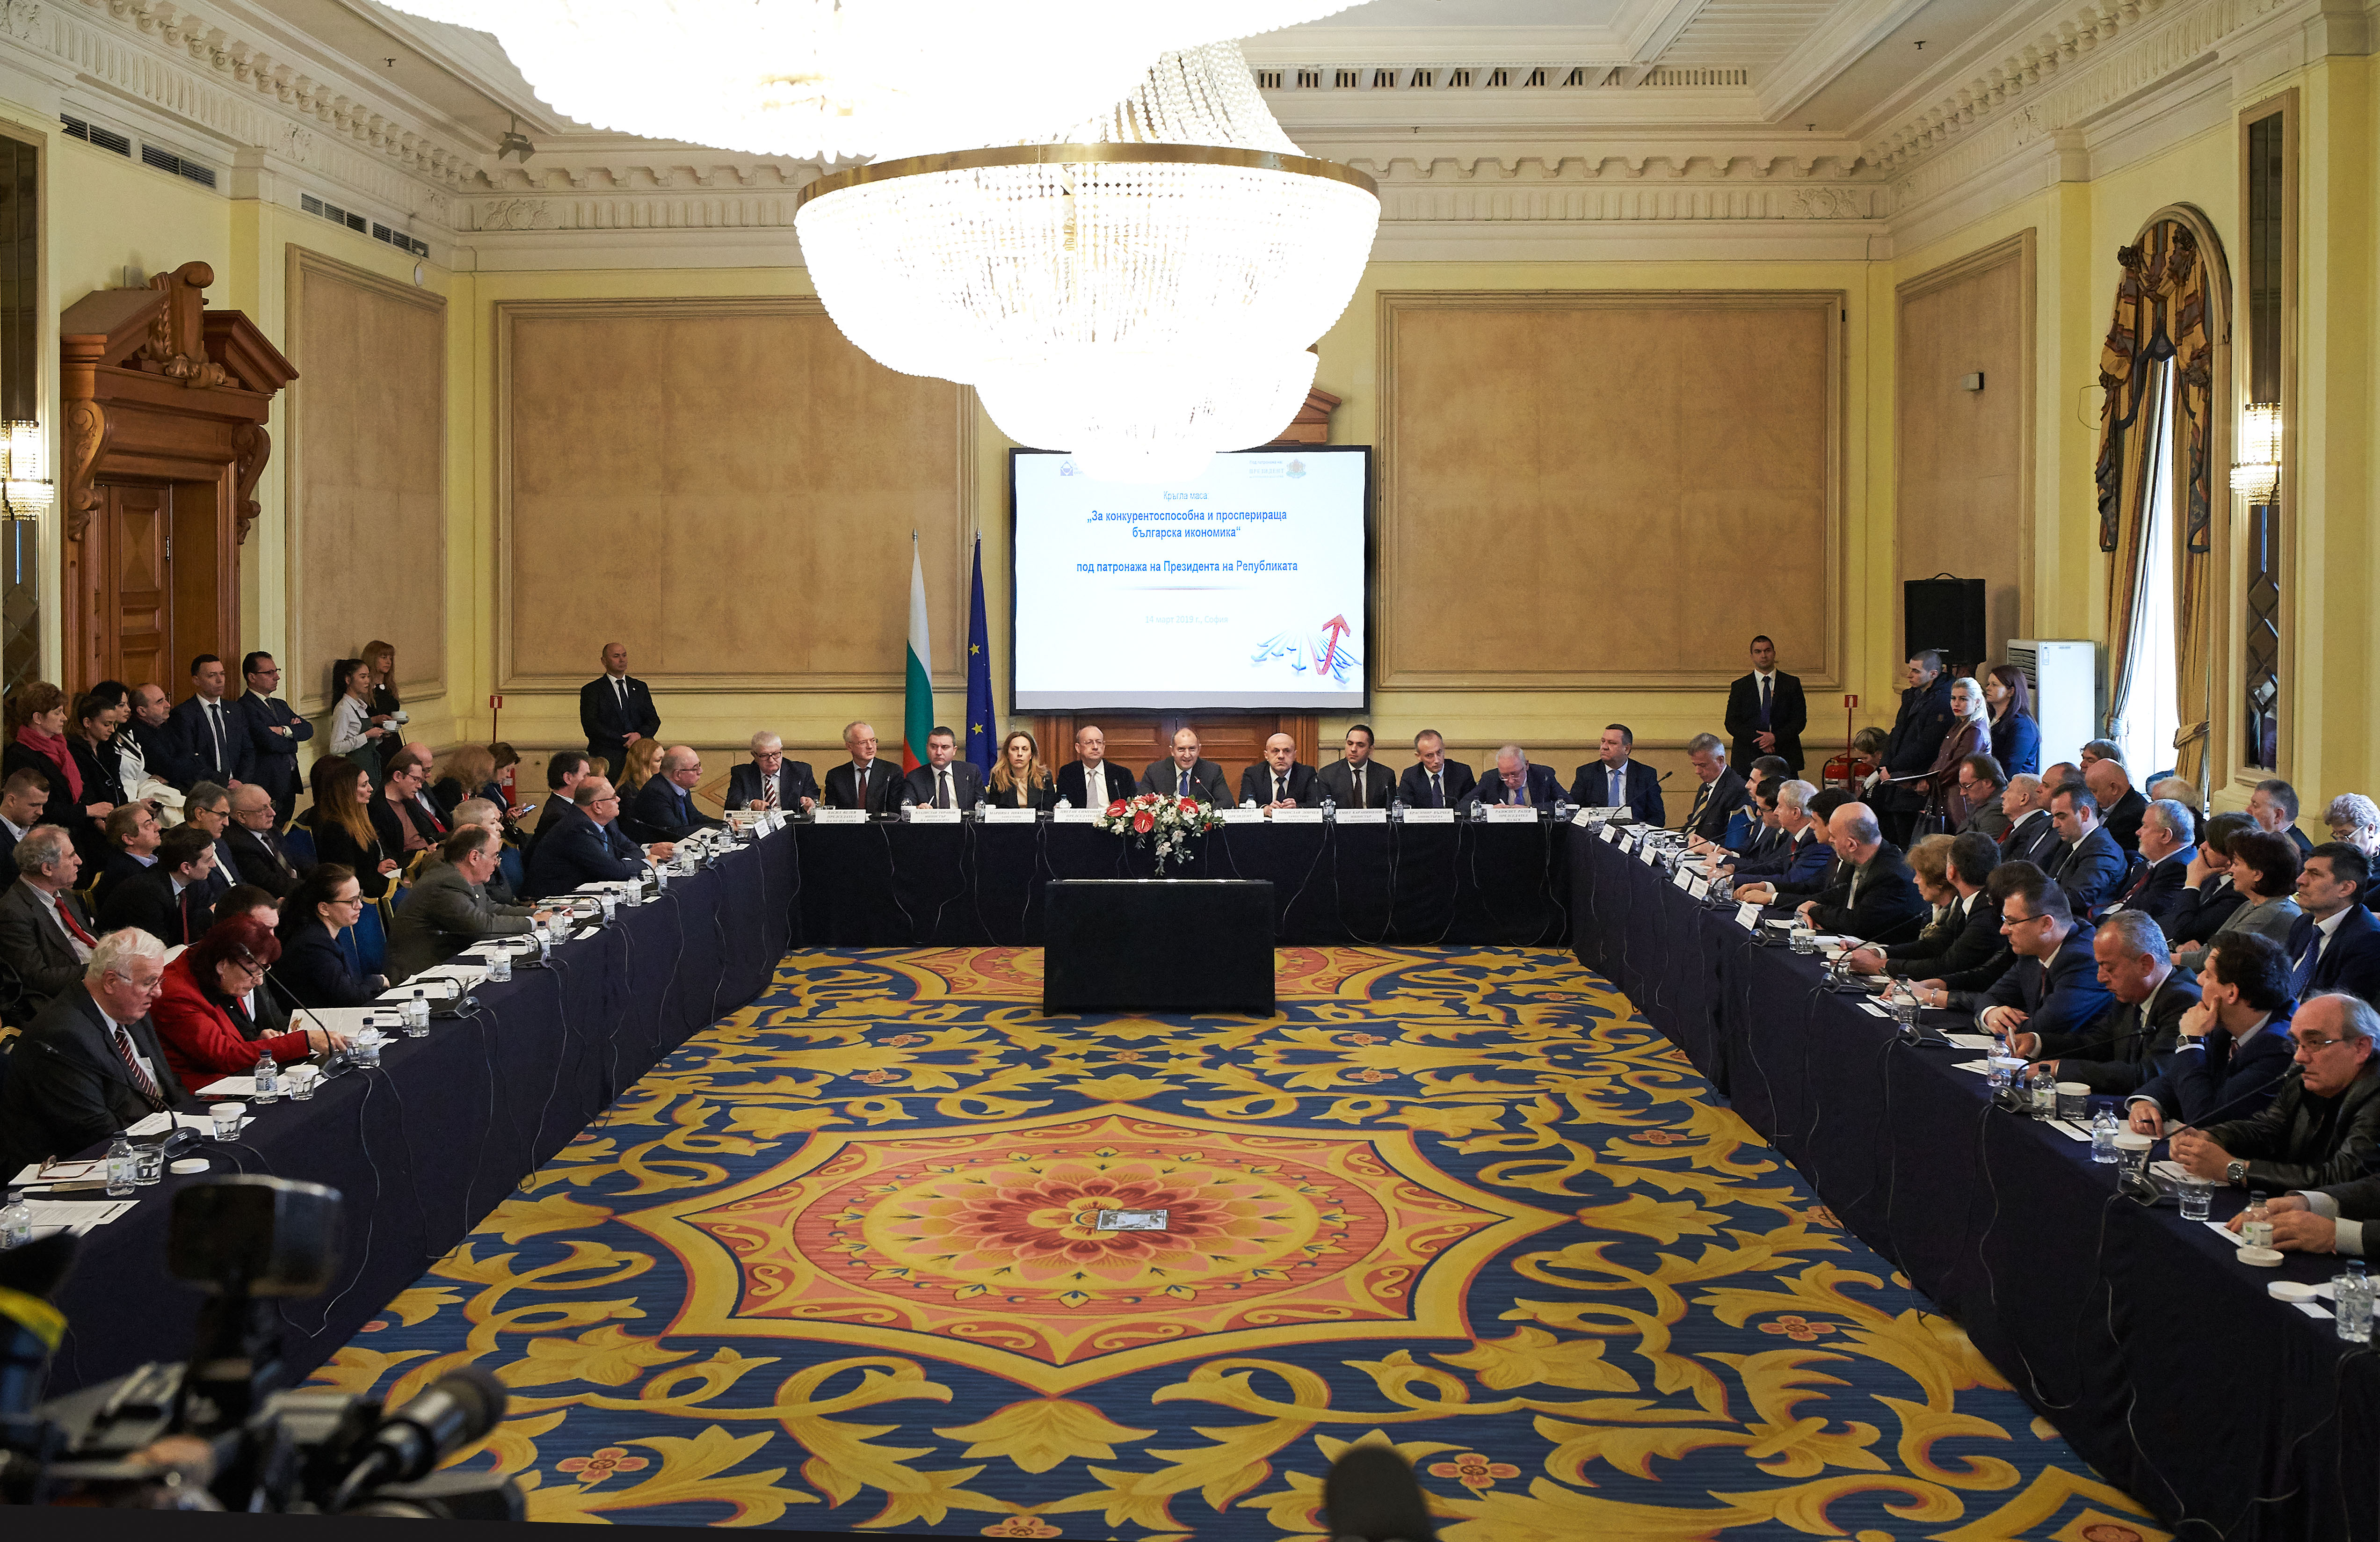 “For competitive and prosperous Bulgarian economy” forum brings together business and government representatives, under the auspices of the President of Bulgaria